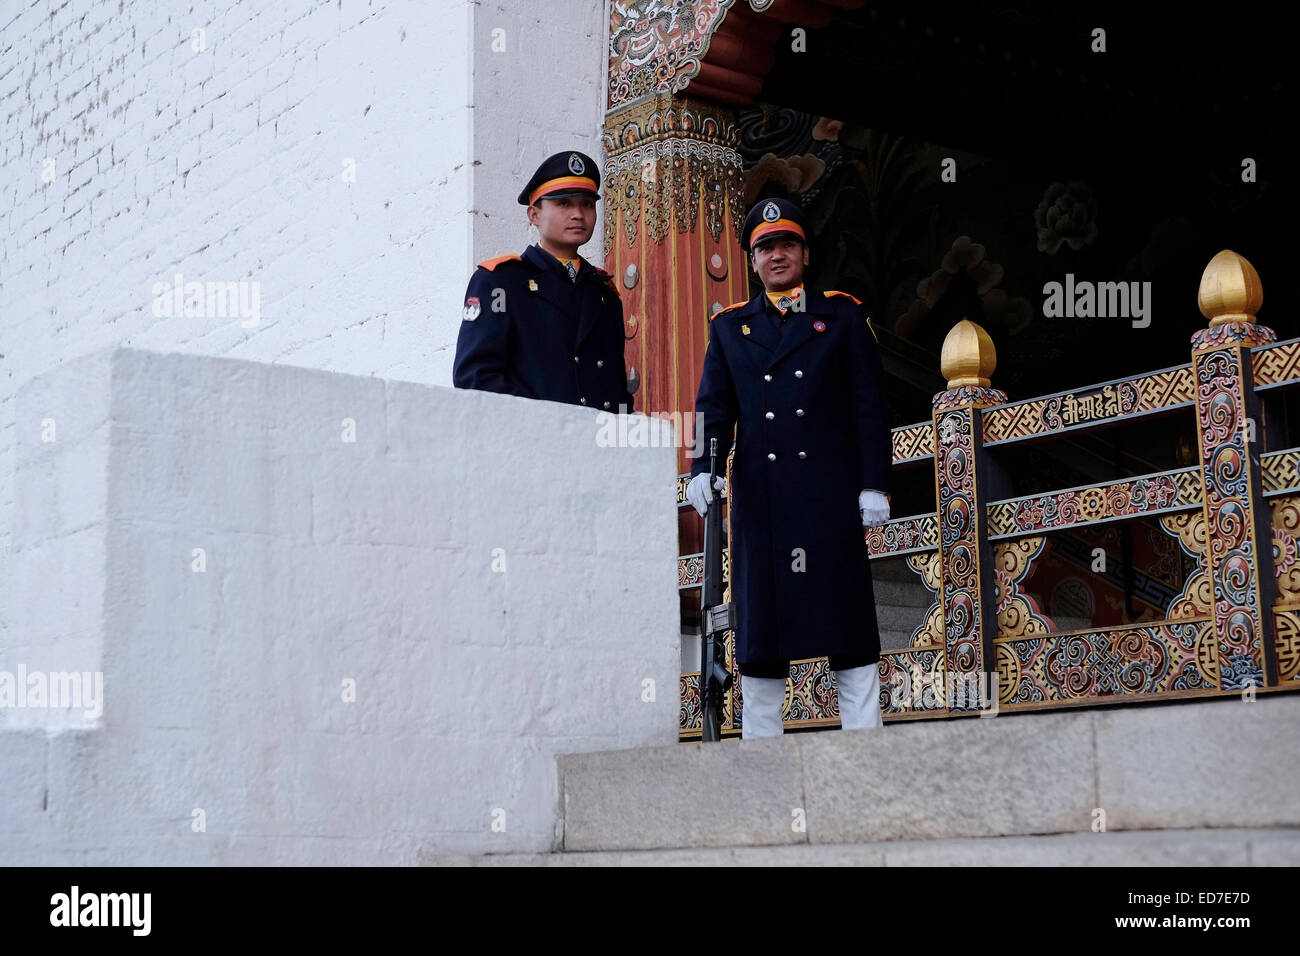 Armed sentries at the entrance to the government offices in Tashichho Dzong fortress seat of Bhutan's government since 1952 and presently houses the throne room and offices of the king on the edge of the city of Thimphu the capital of Bhutan Stock Photo